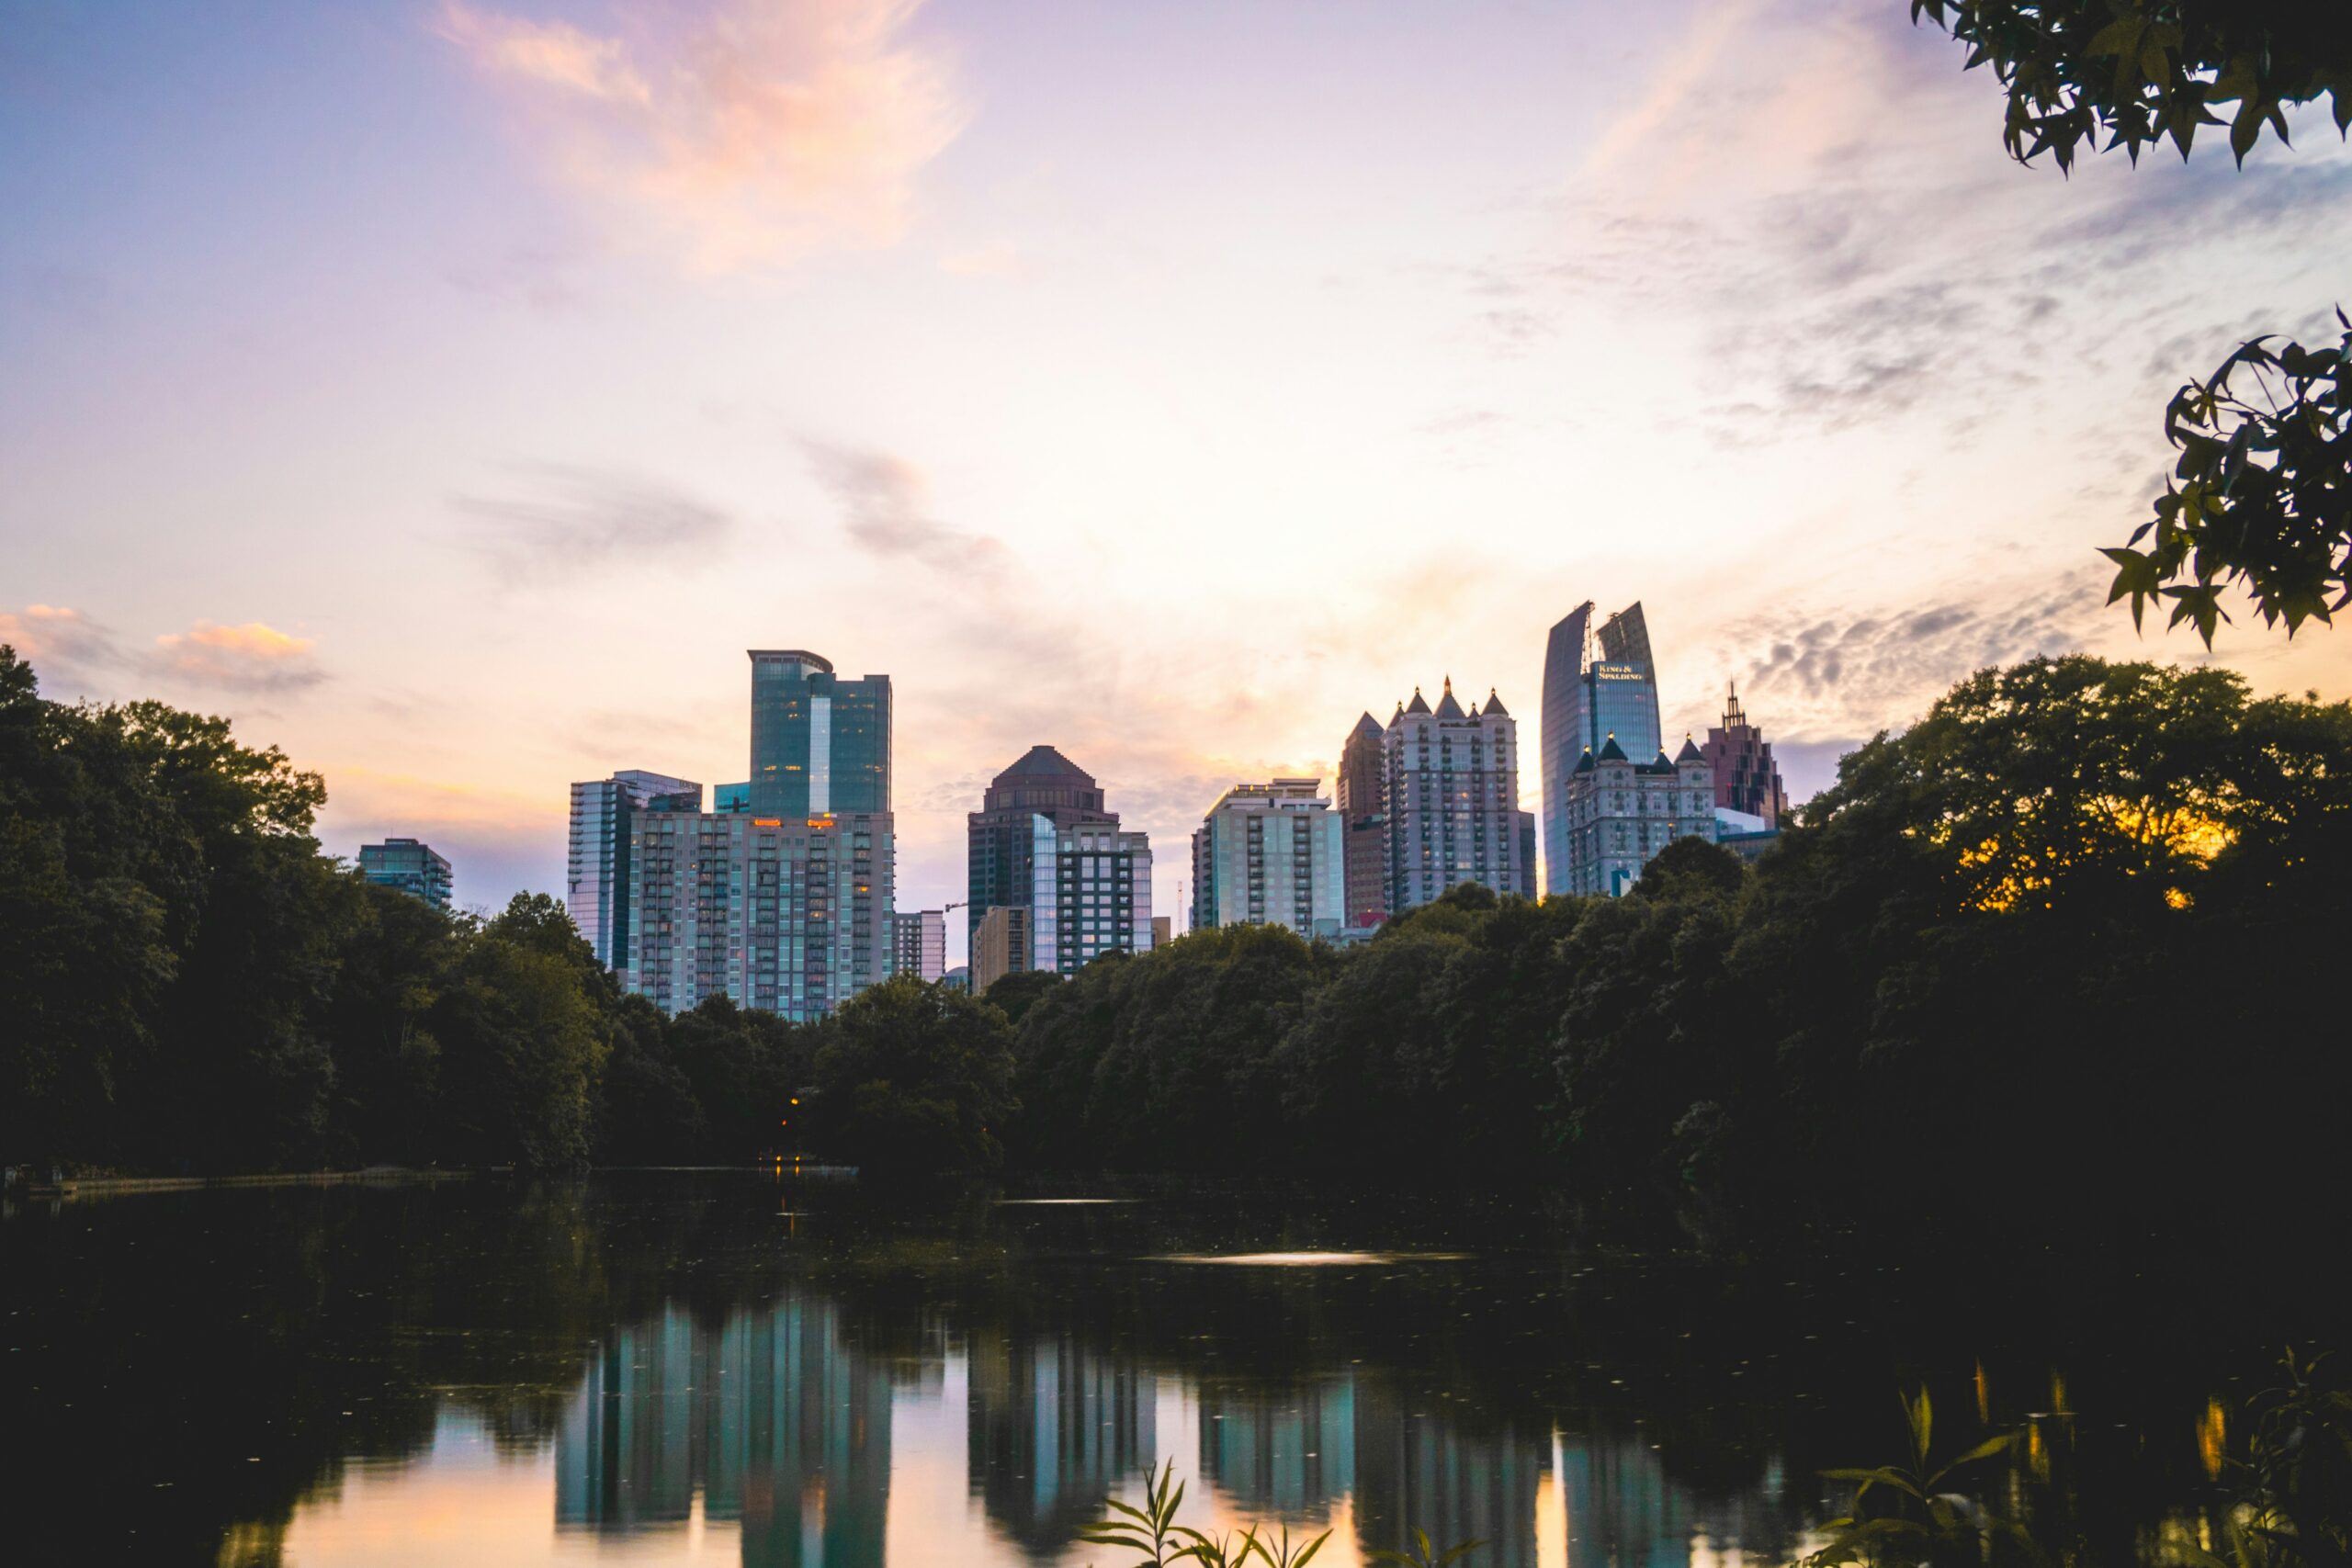 Learn more about Atlanta, the main filming destination of the hype Tyler Perry movie “Mea Culpa”.
Pictured: a sunset in Atlanta’s Piedmont Park overlooking the pond